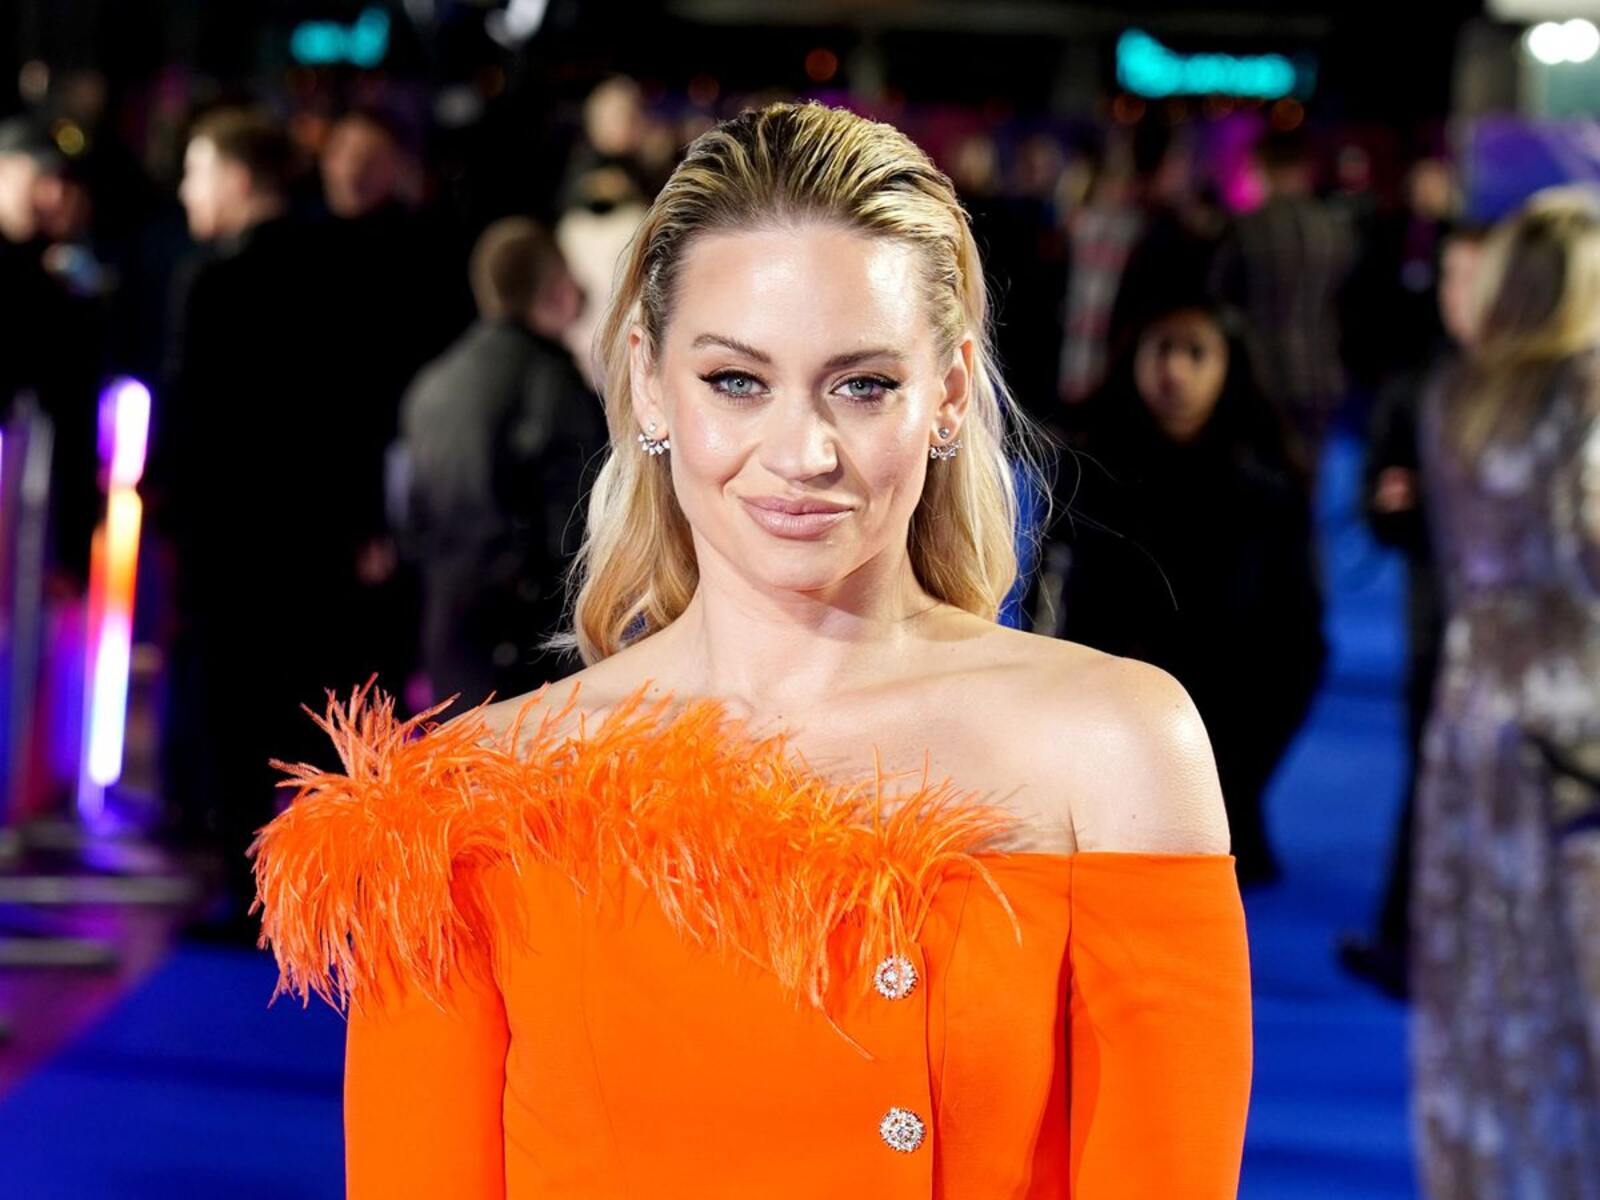 9 Fascinating Facts About Kimberly Wyatt - Facts.net